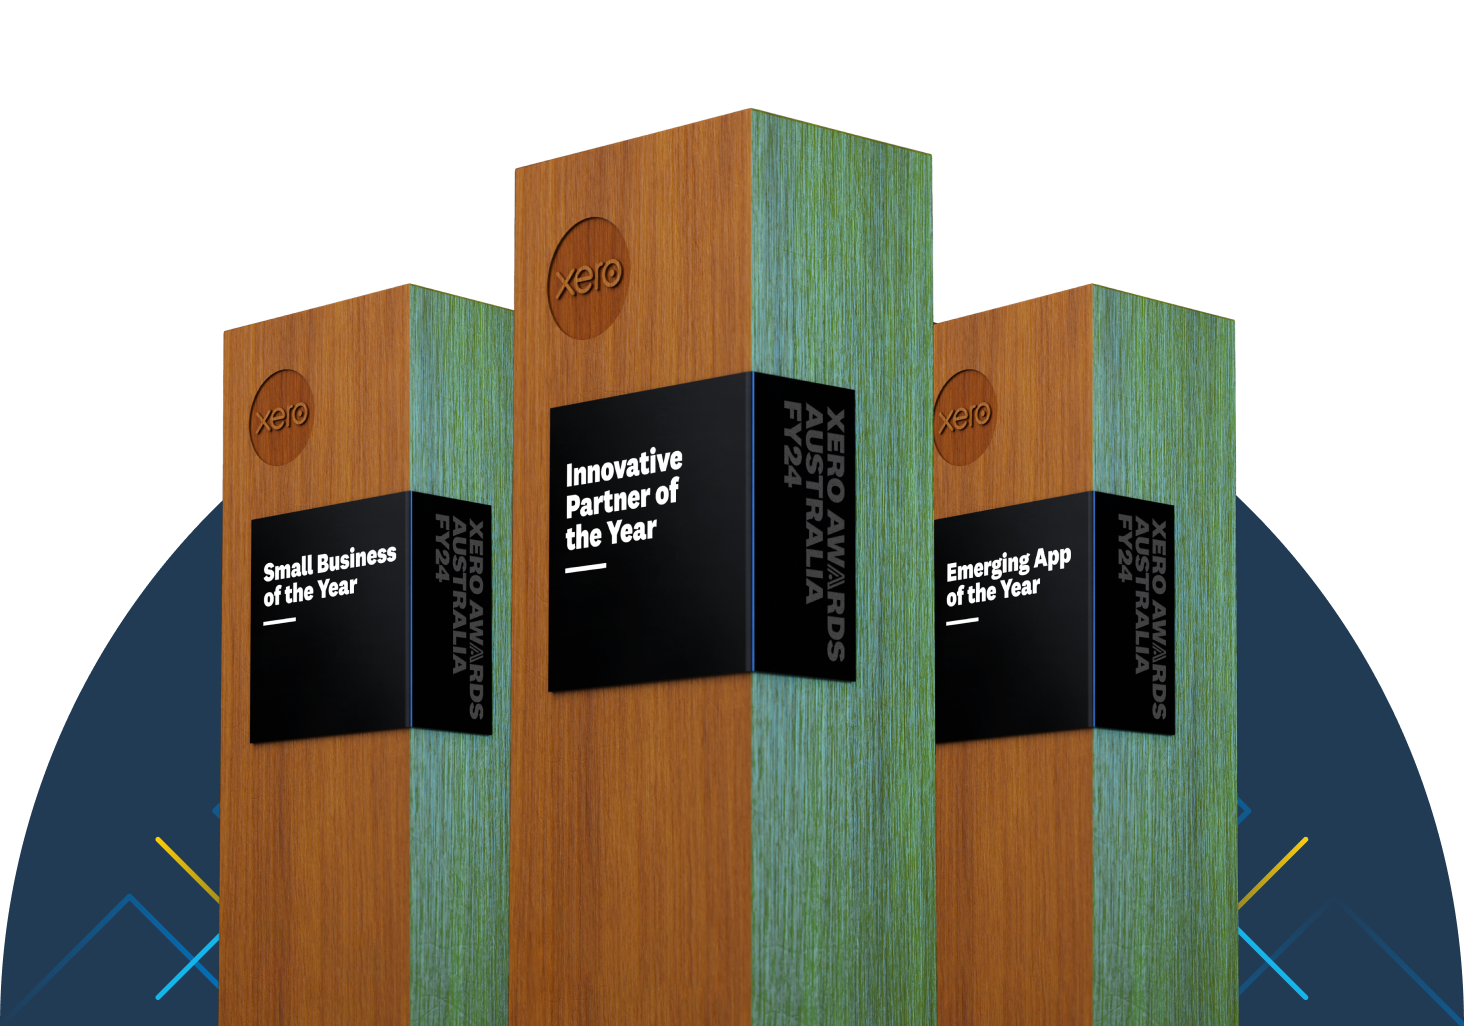 Engraved wooden trophies representing some of the Xero Awards categories.